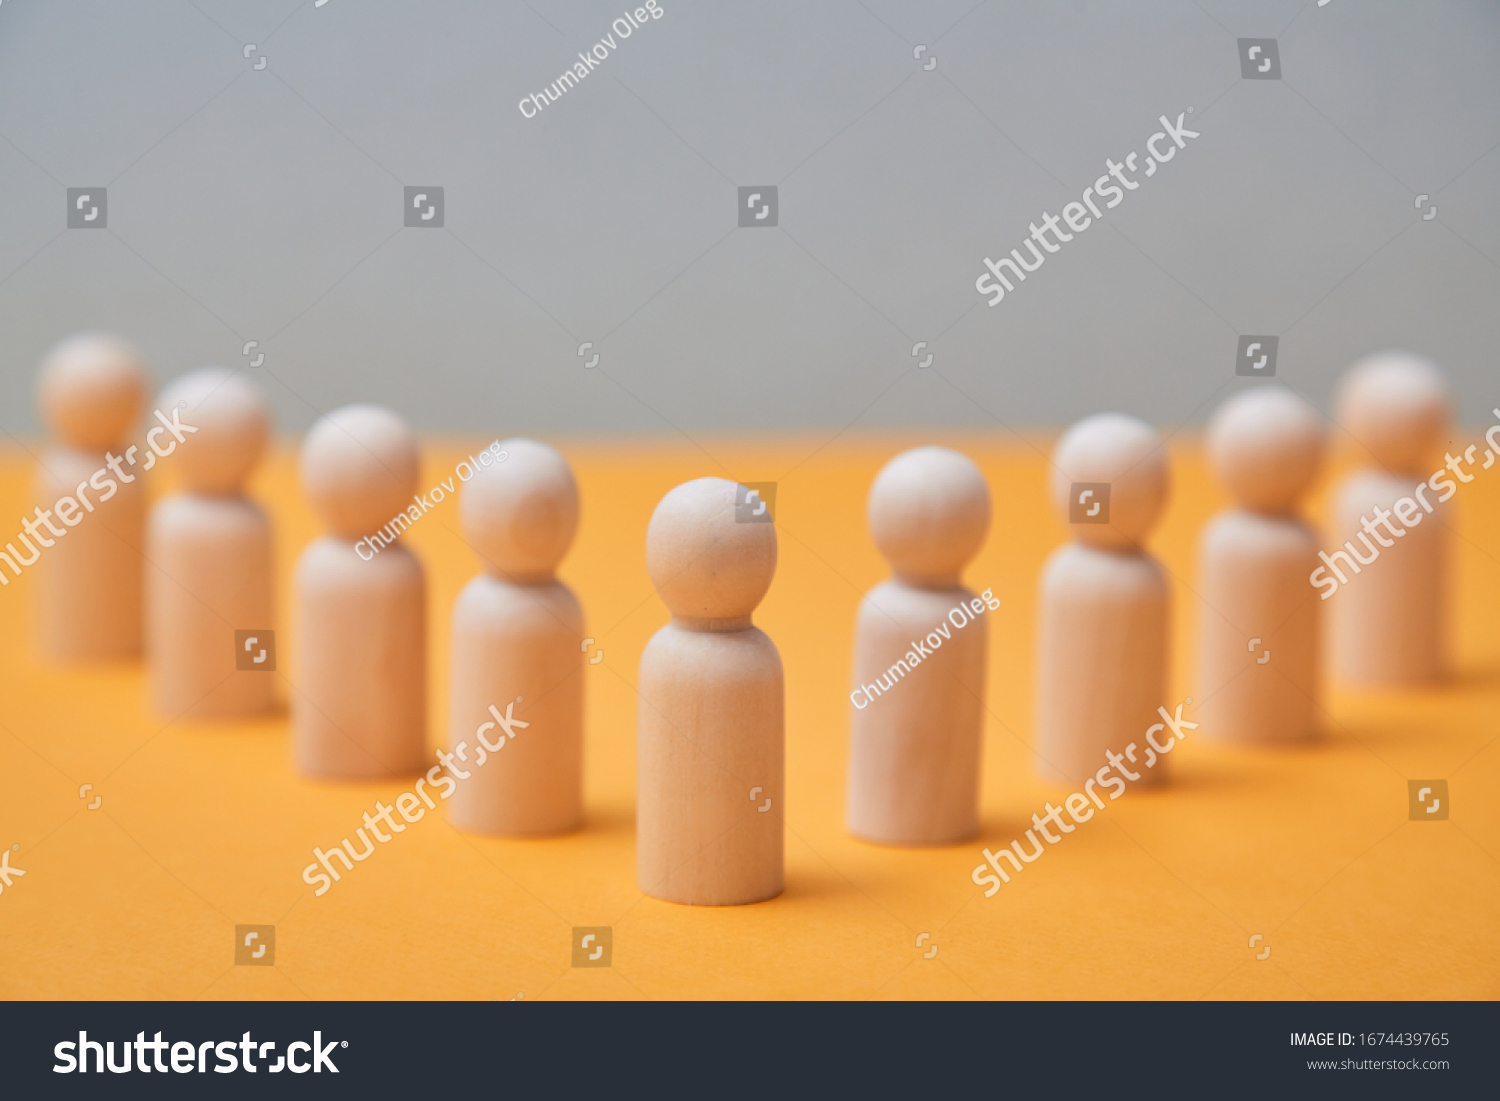 Creative thinking mockup. Individuality and creativity. Thinking outside the box. Person figure stands out from crowd #1674439765